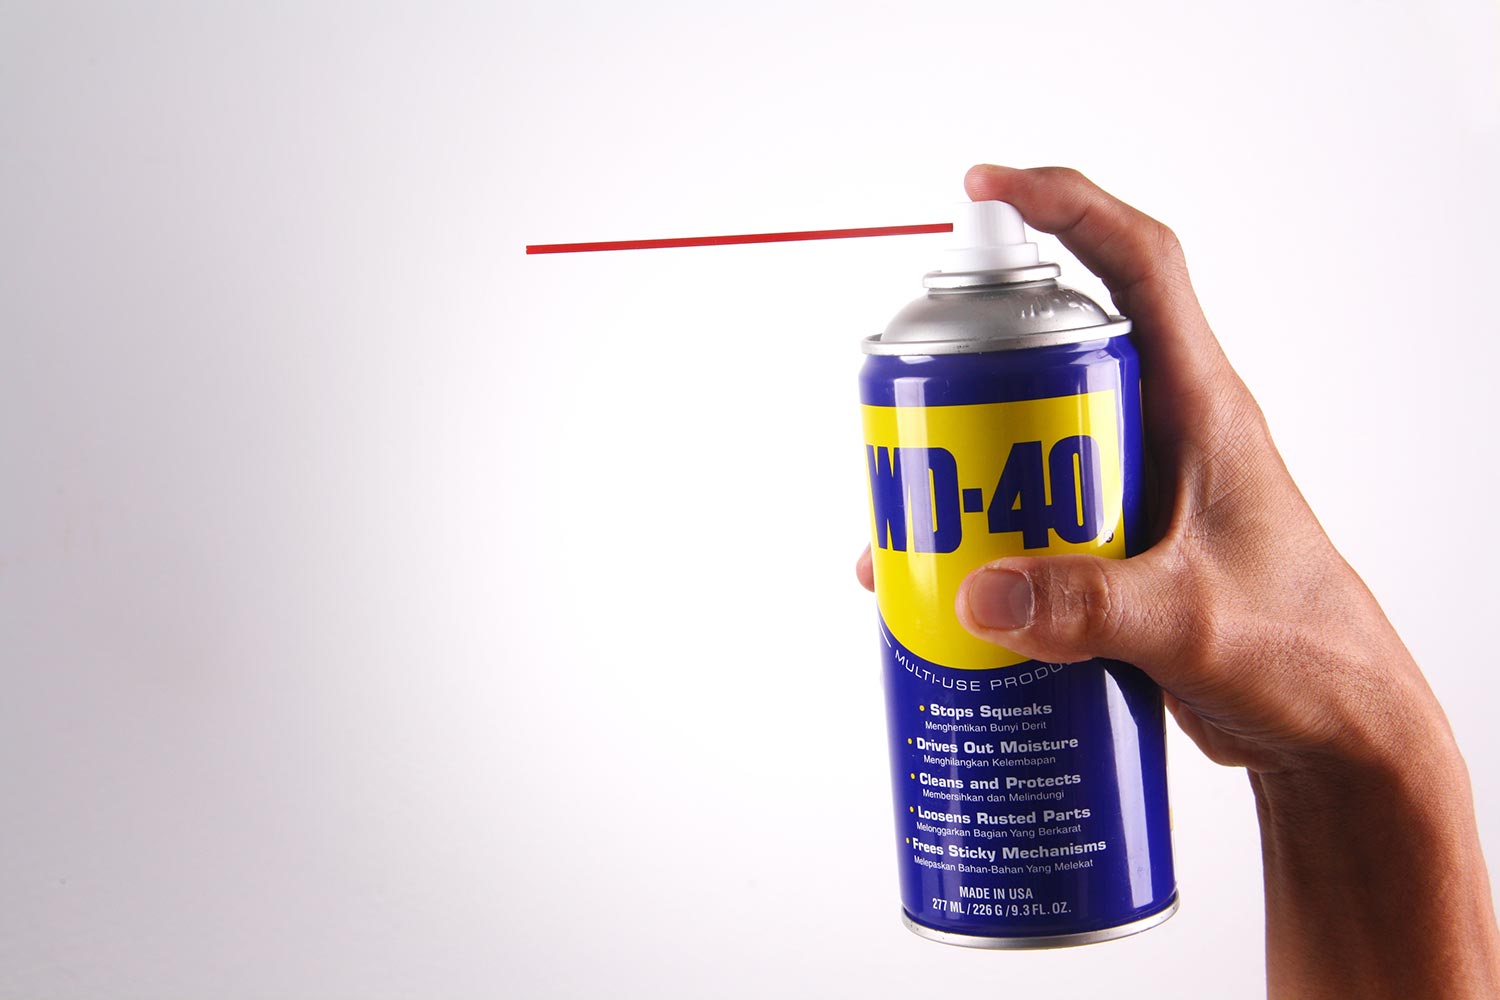 WD-40 Product for multi purpose use for rusty item